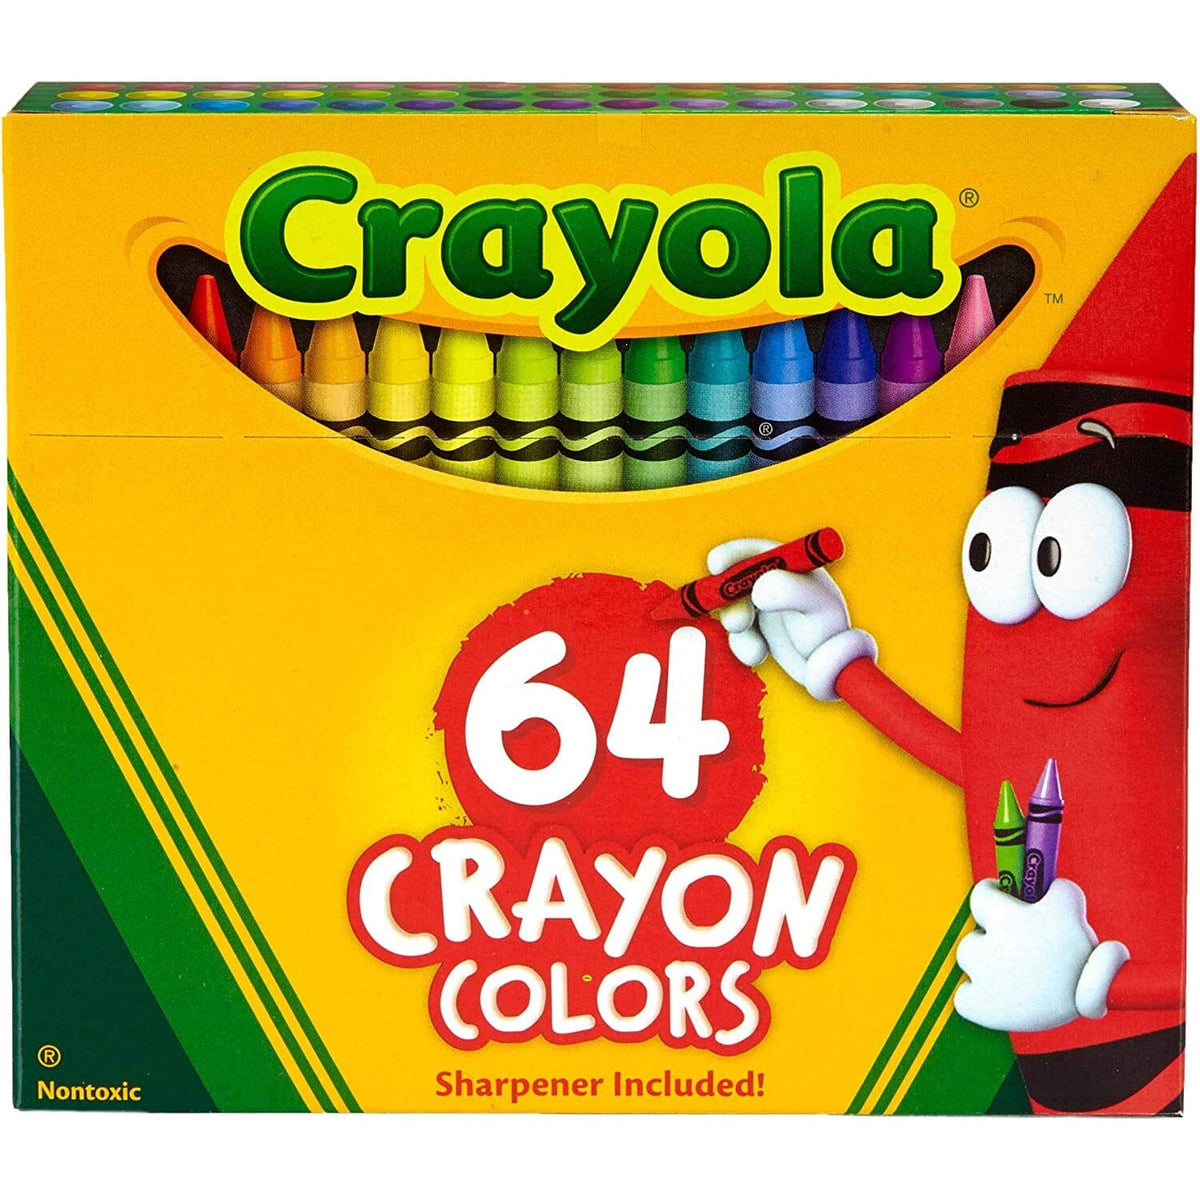 Creativity .. Colorful #crayola sets New Arrivals & re stocked for